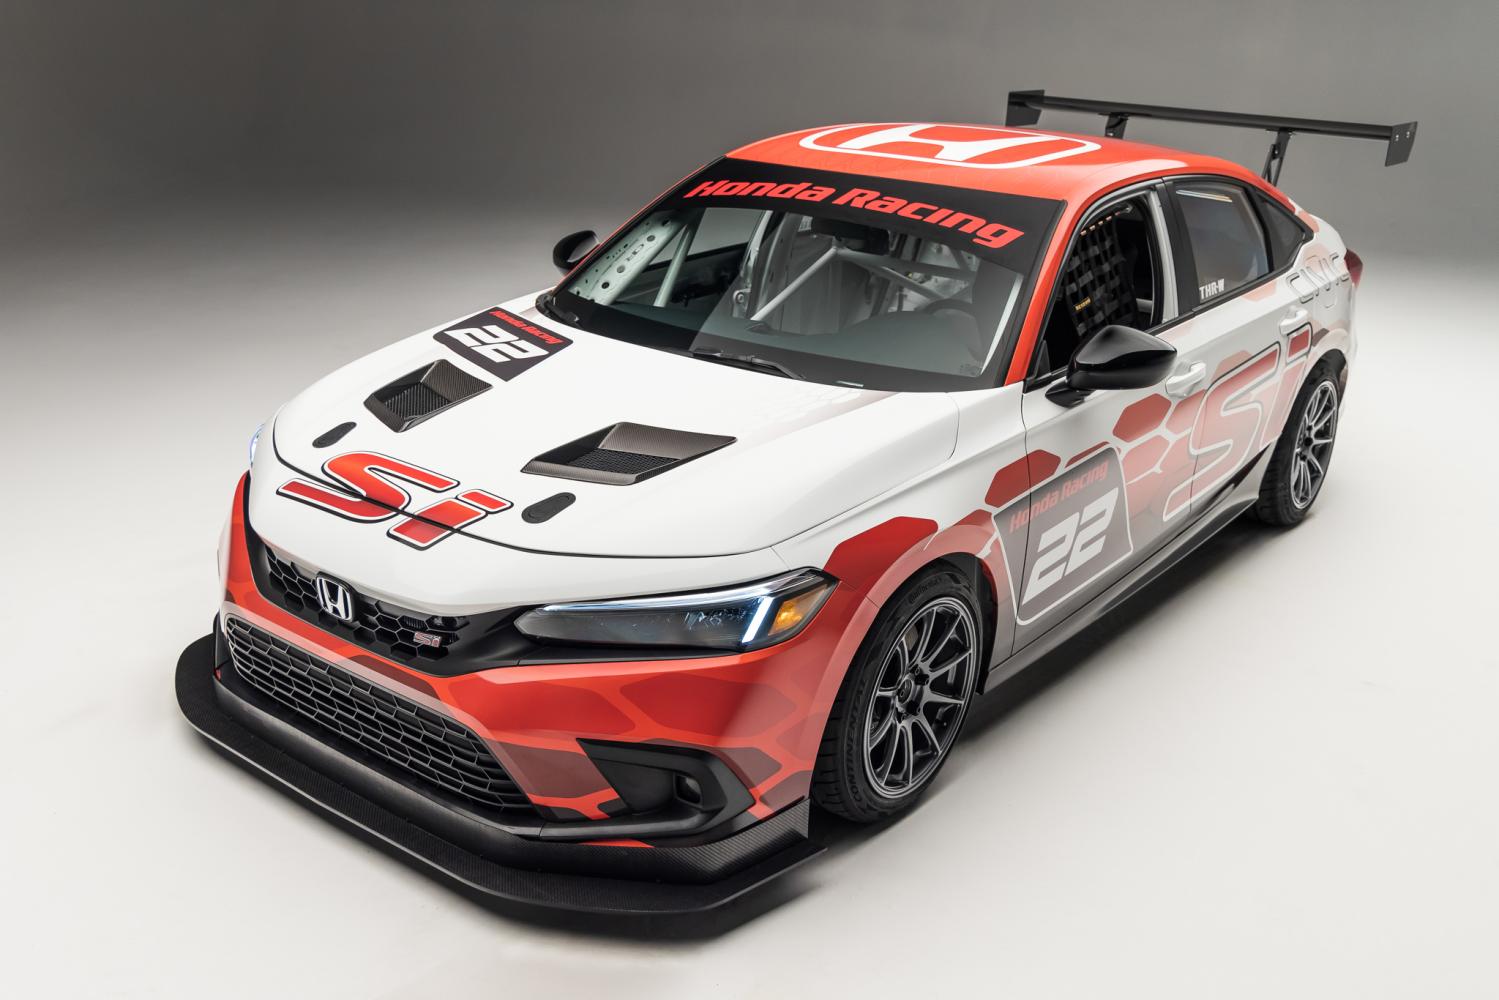 Team Honda Research West Civic Si Race Car Equipped With Seibon Carbon